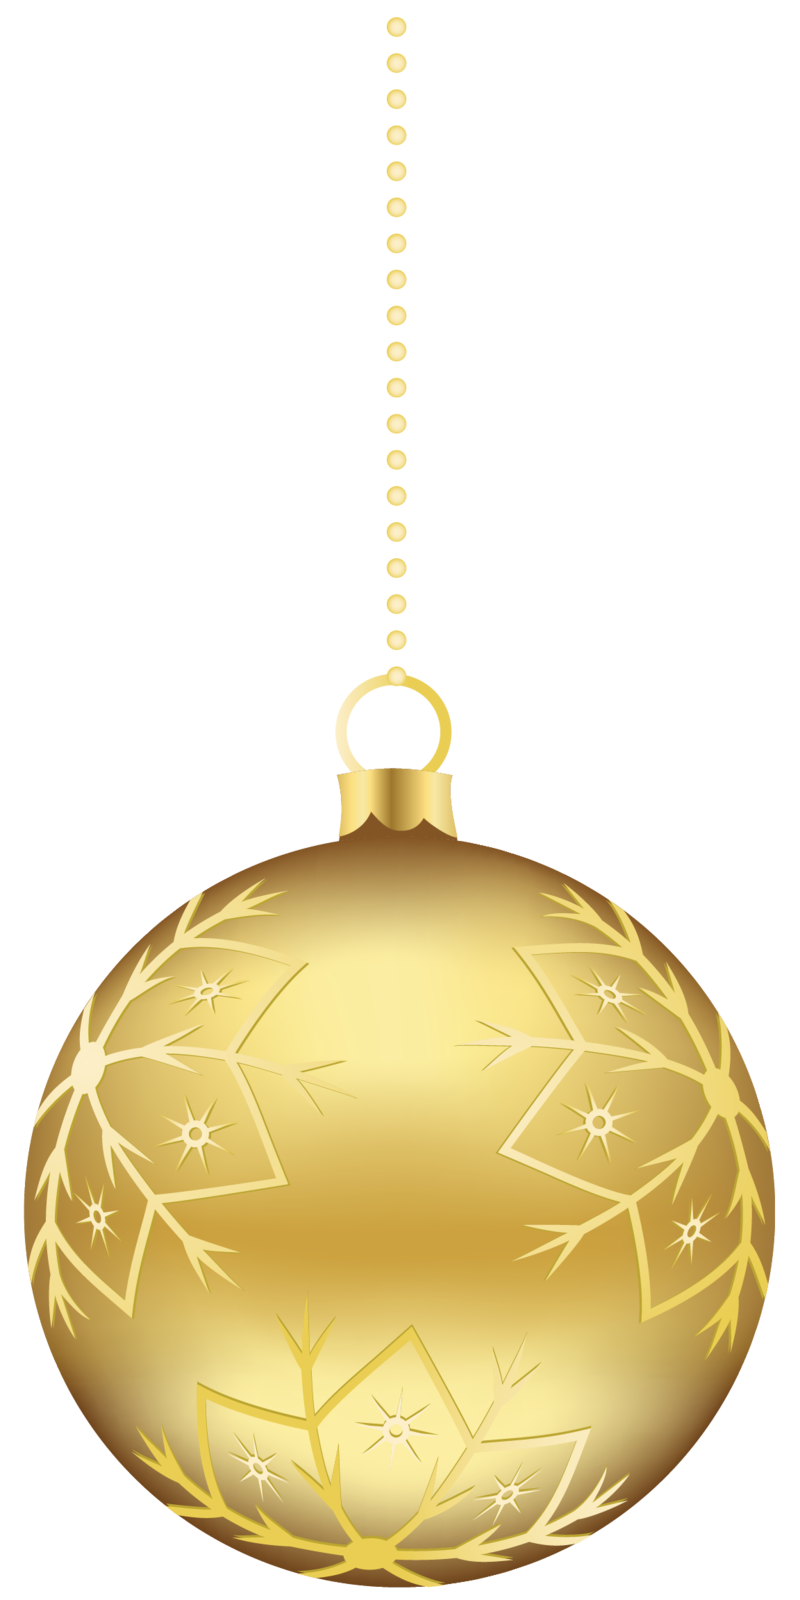 Large_Transparent_Gold_Christmas_Ball_Ornament_PNG_Clipart.png